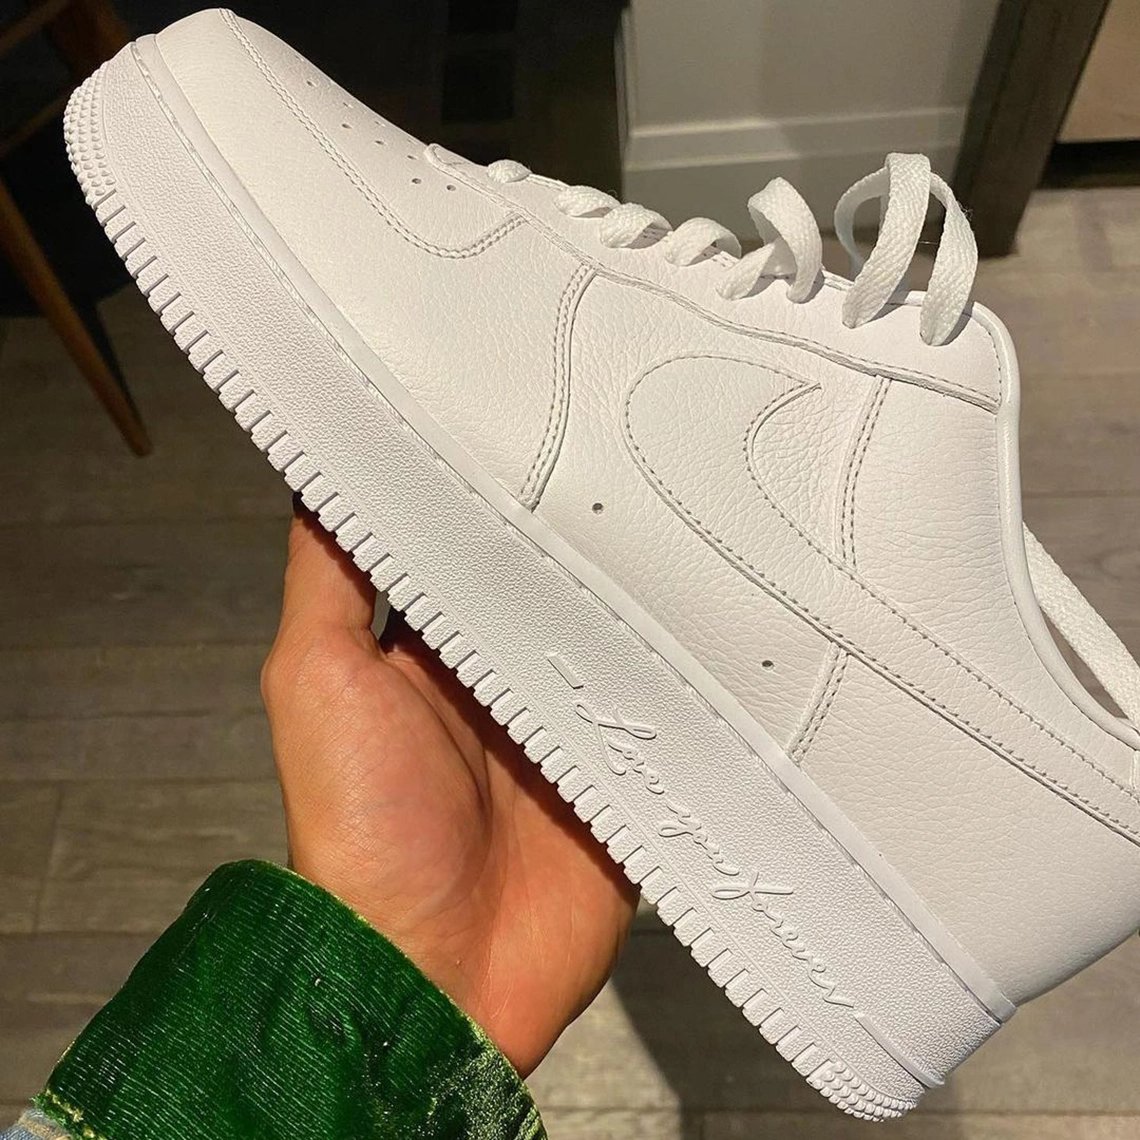 brendandunne on Twitter: "Some rumors floating around this week that the Drake Air Force 1s were canceled. source at Nike, that is not the case and a release is still